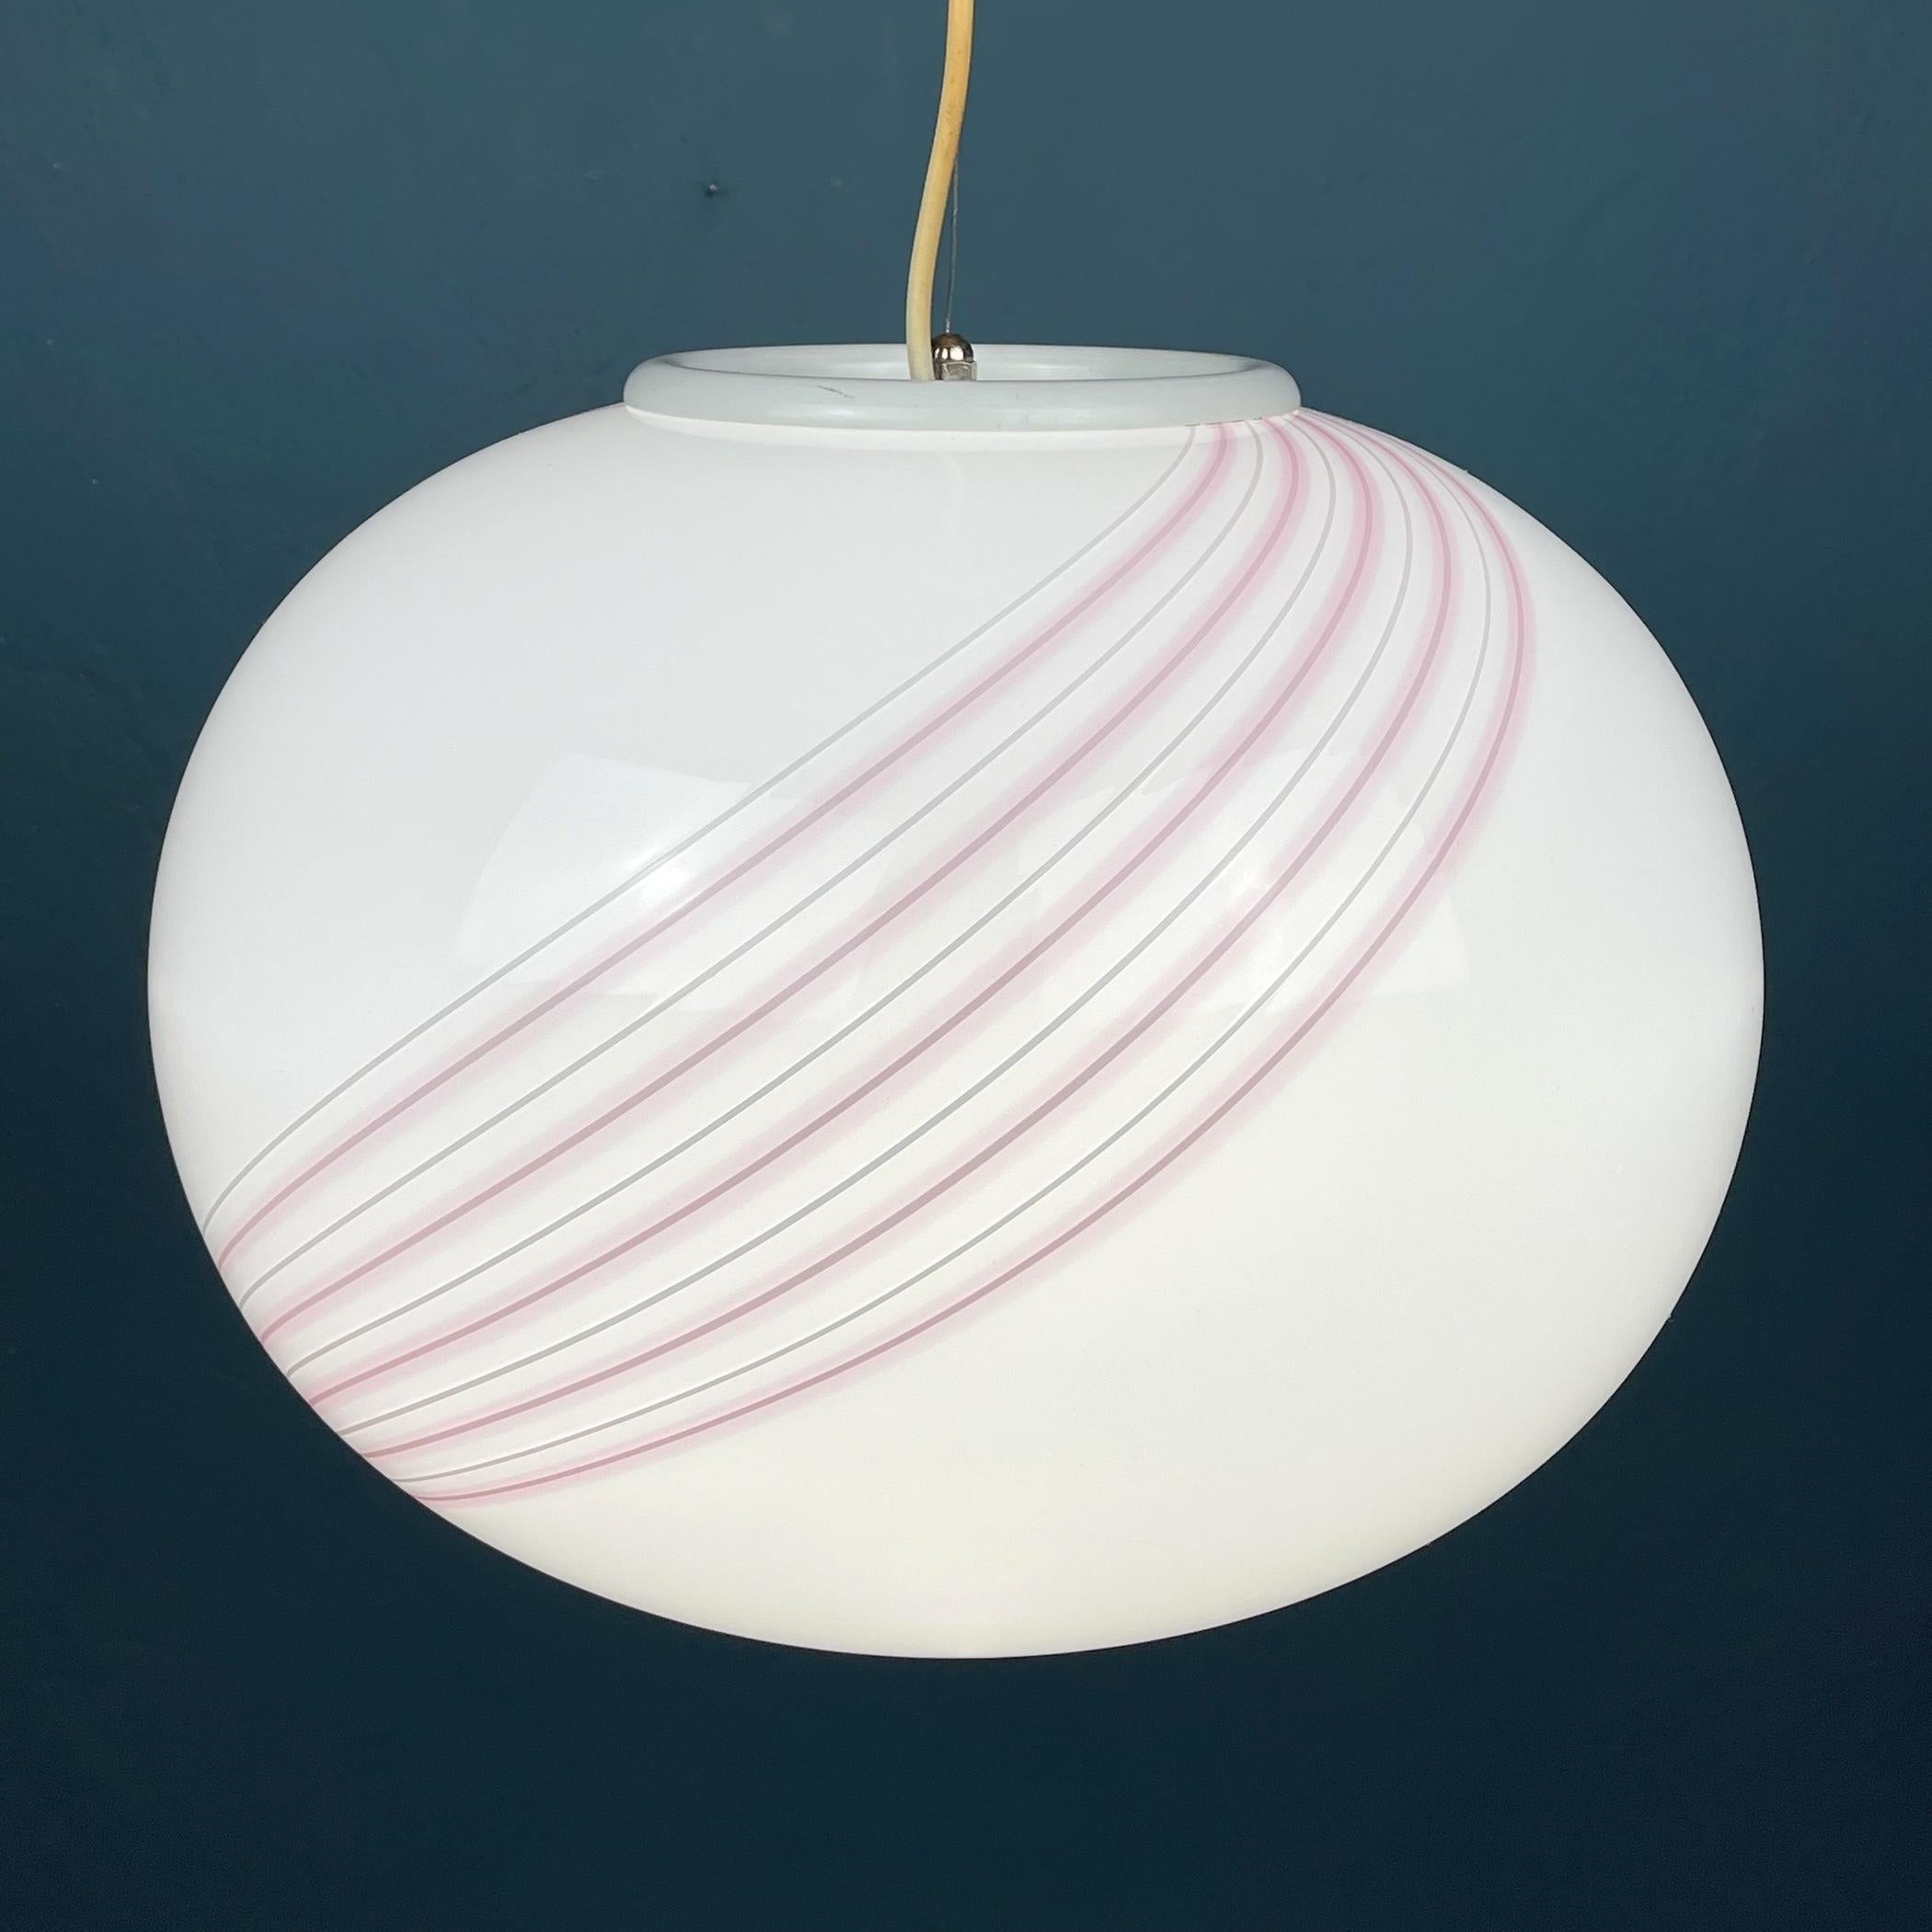 Classic swirl murano pendant lamp by Vetri Murano made in Italy in the 1970s. Very beautiful white Murano glass with bends in the form of a sphere. The lamp is in perfect condition, fully functional. No chips or cracks. Maximum height with cable 180